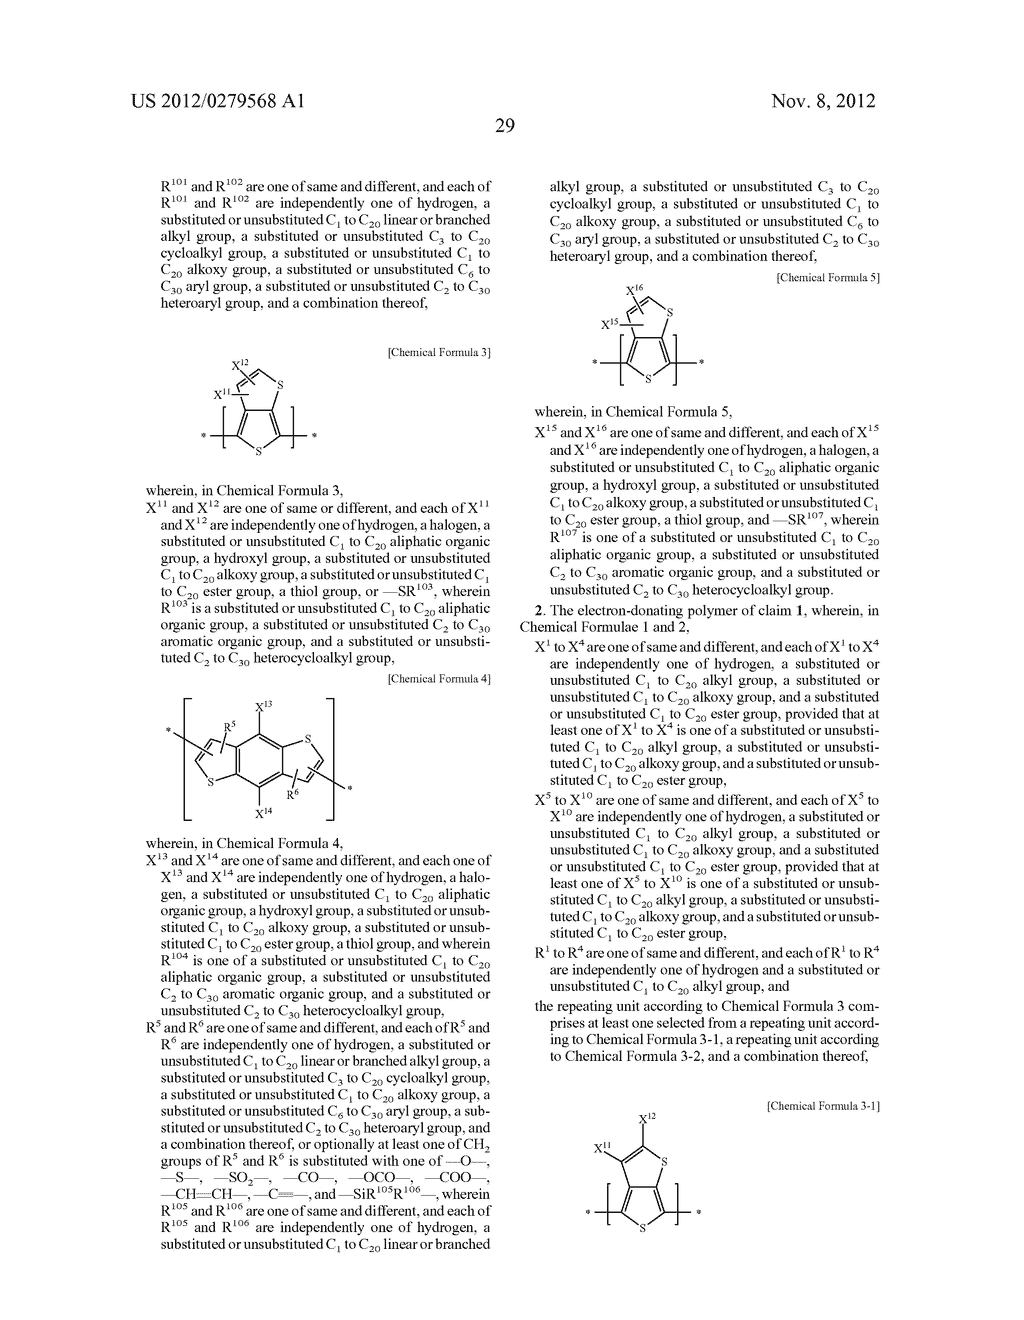 Electron Donating Polymers And Organic Solar Cells Including The Same - diagram, schematic, and image 39